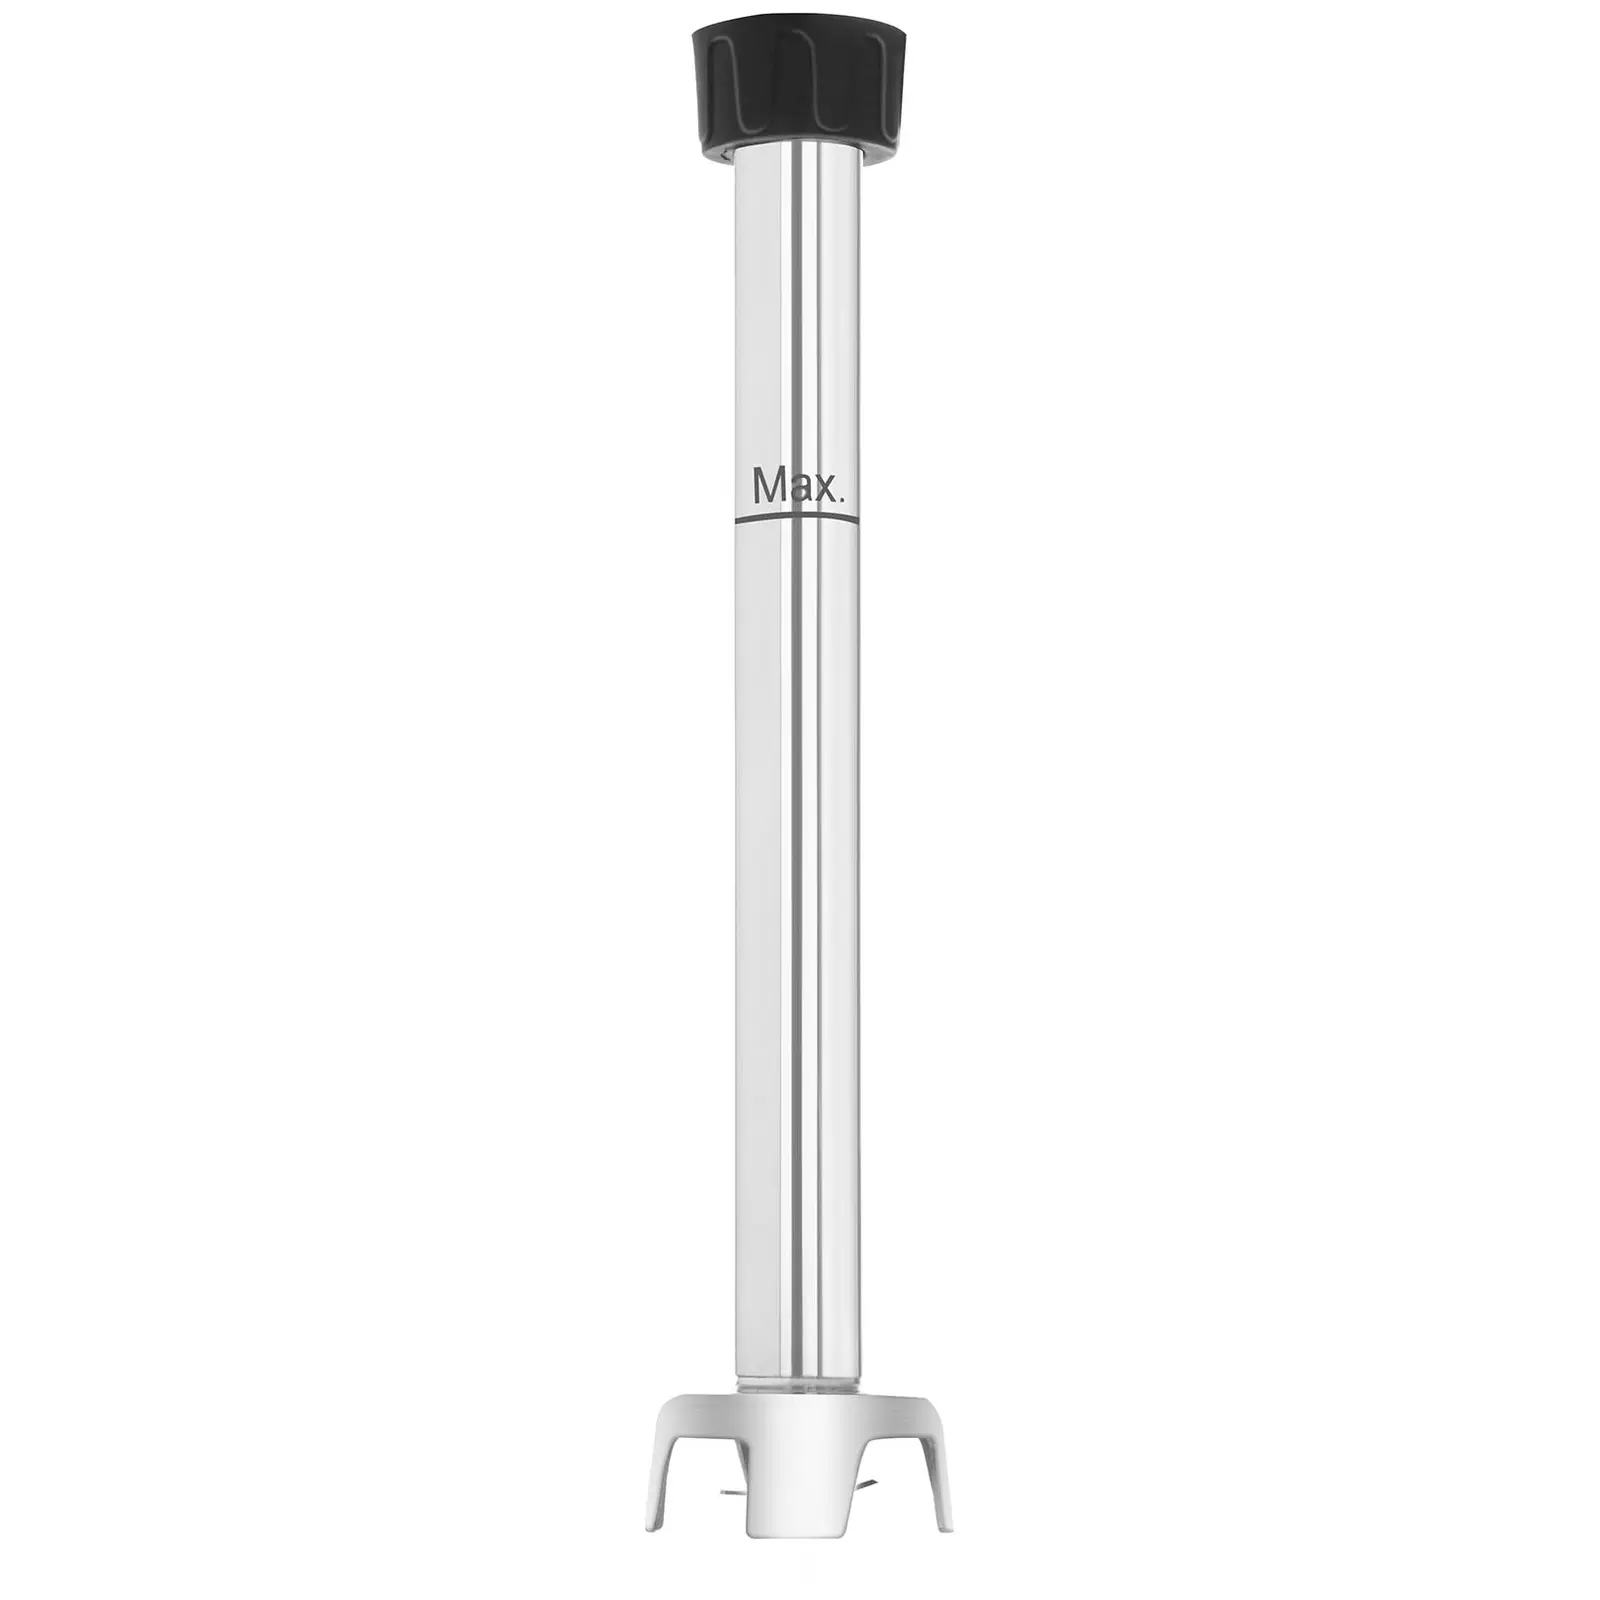 Hand blender - 350 W - 400 mm - 4,000 to 18,000 rpm